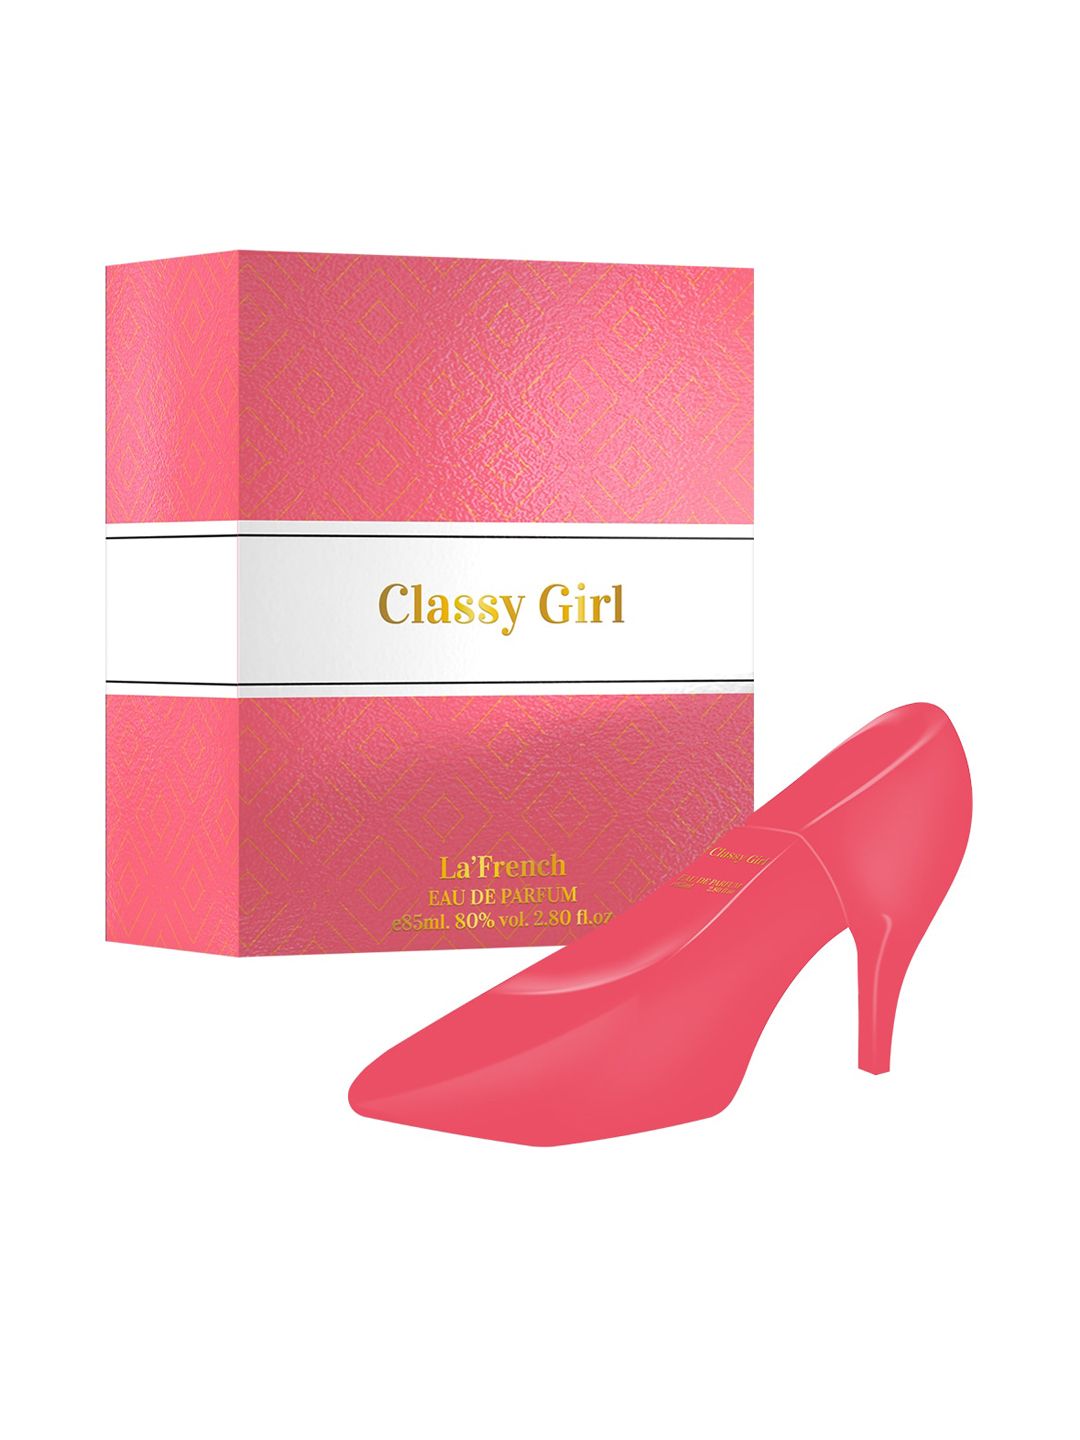 La French Classy Girl Eau De Parfum with Extra Neutral Alcohol - 85 ml Price in India